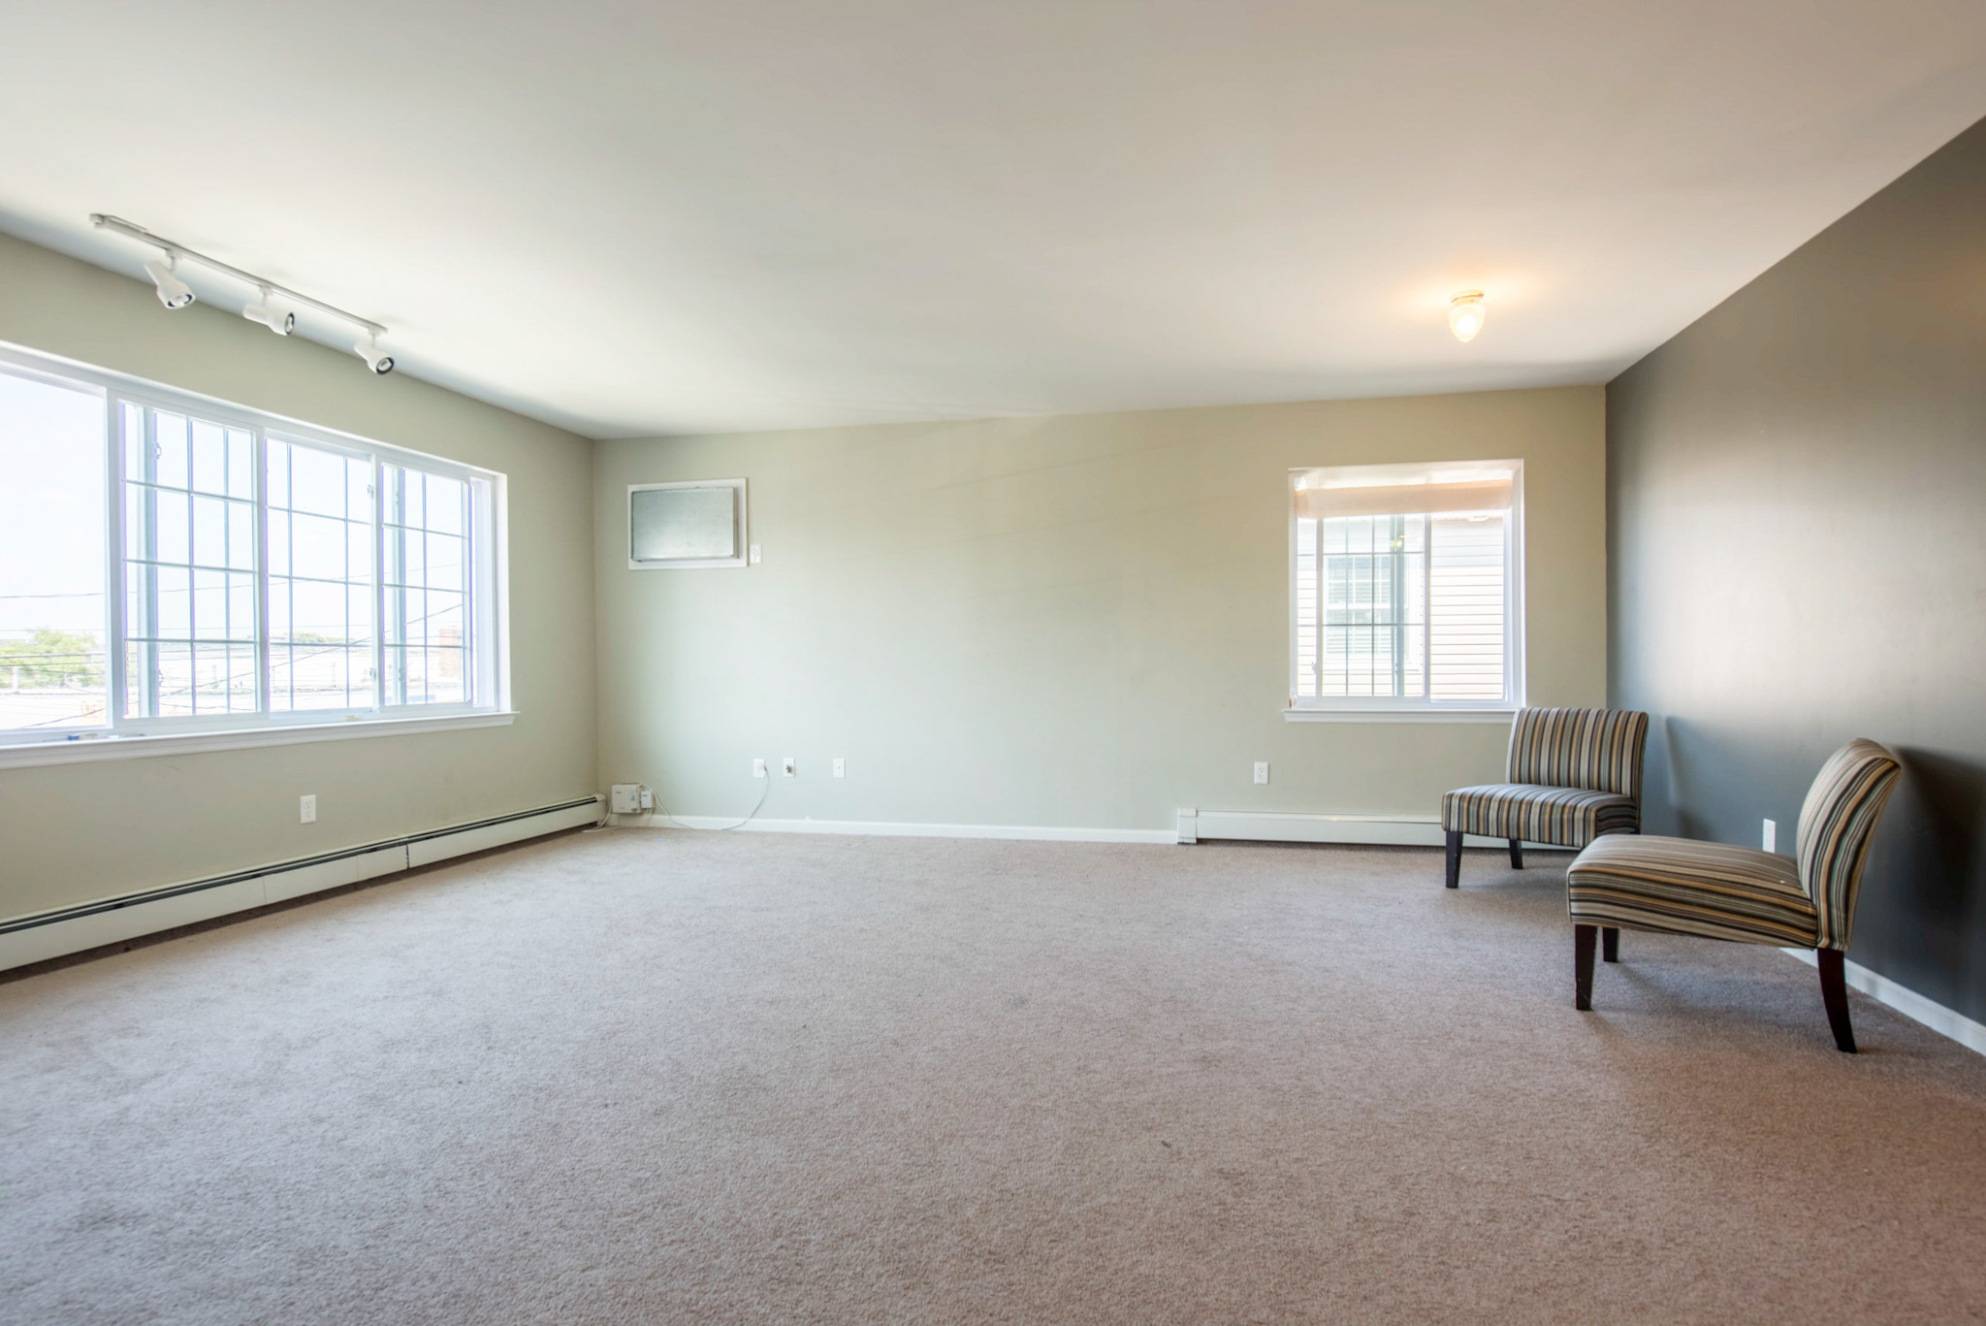 Spacious three bedroom apartment in move in ready condition in the Far Rockaway section of Queens.